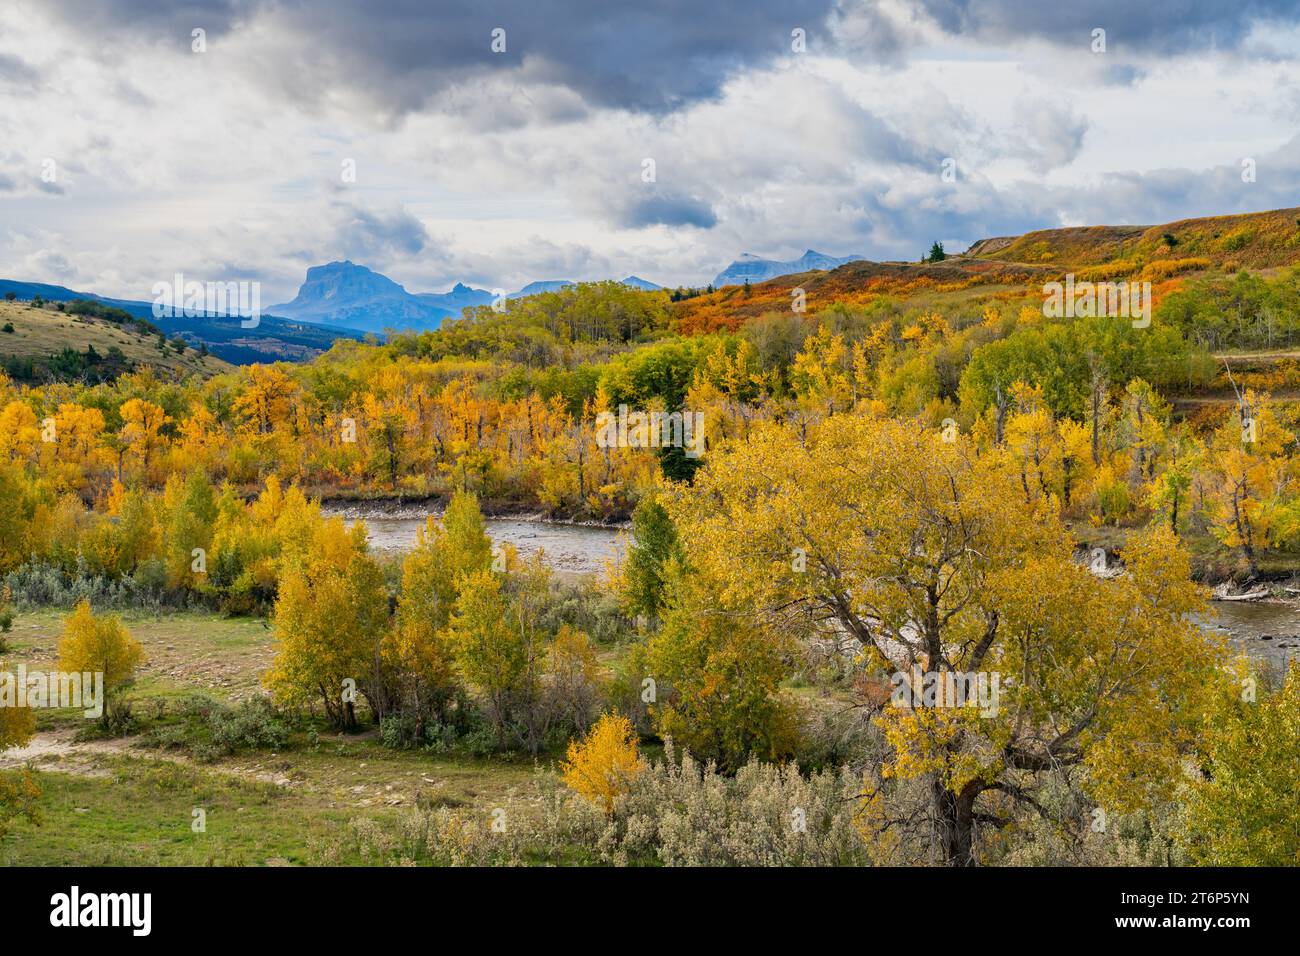 Fall foliage color in the foothills of Waterton Lakes National Park, near Mountain View, Alberta, Canada. Stock Photo